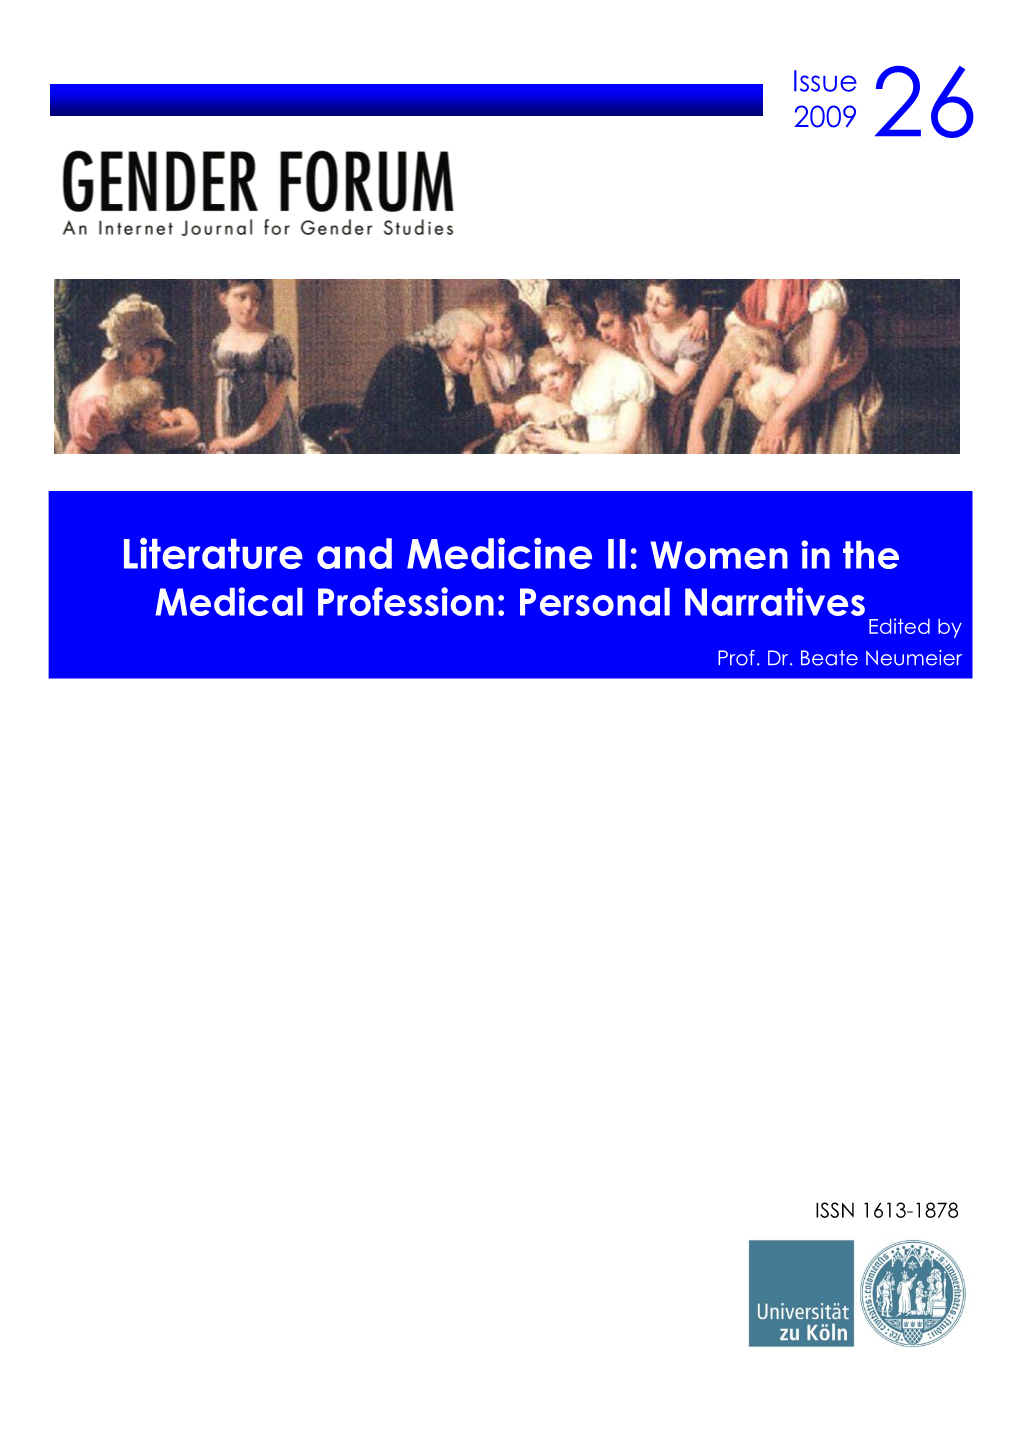 Literature and Medicine II: Women in the Medical Profession: Personal Narratives Edited by Prof